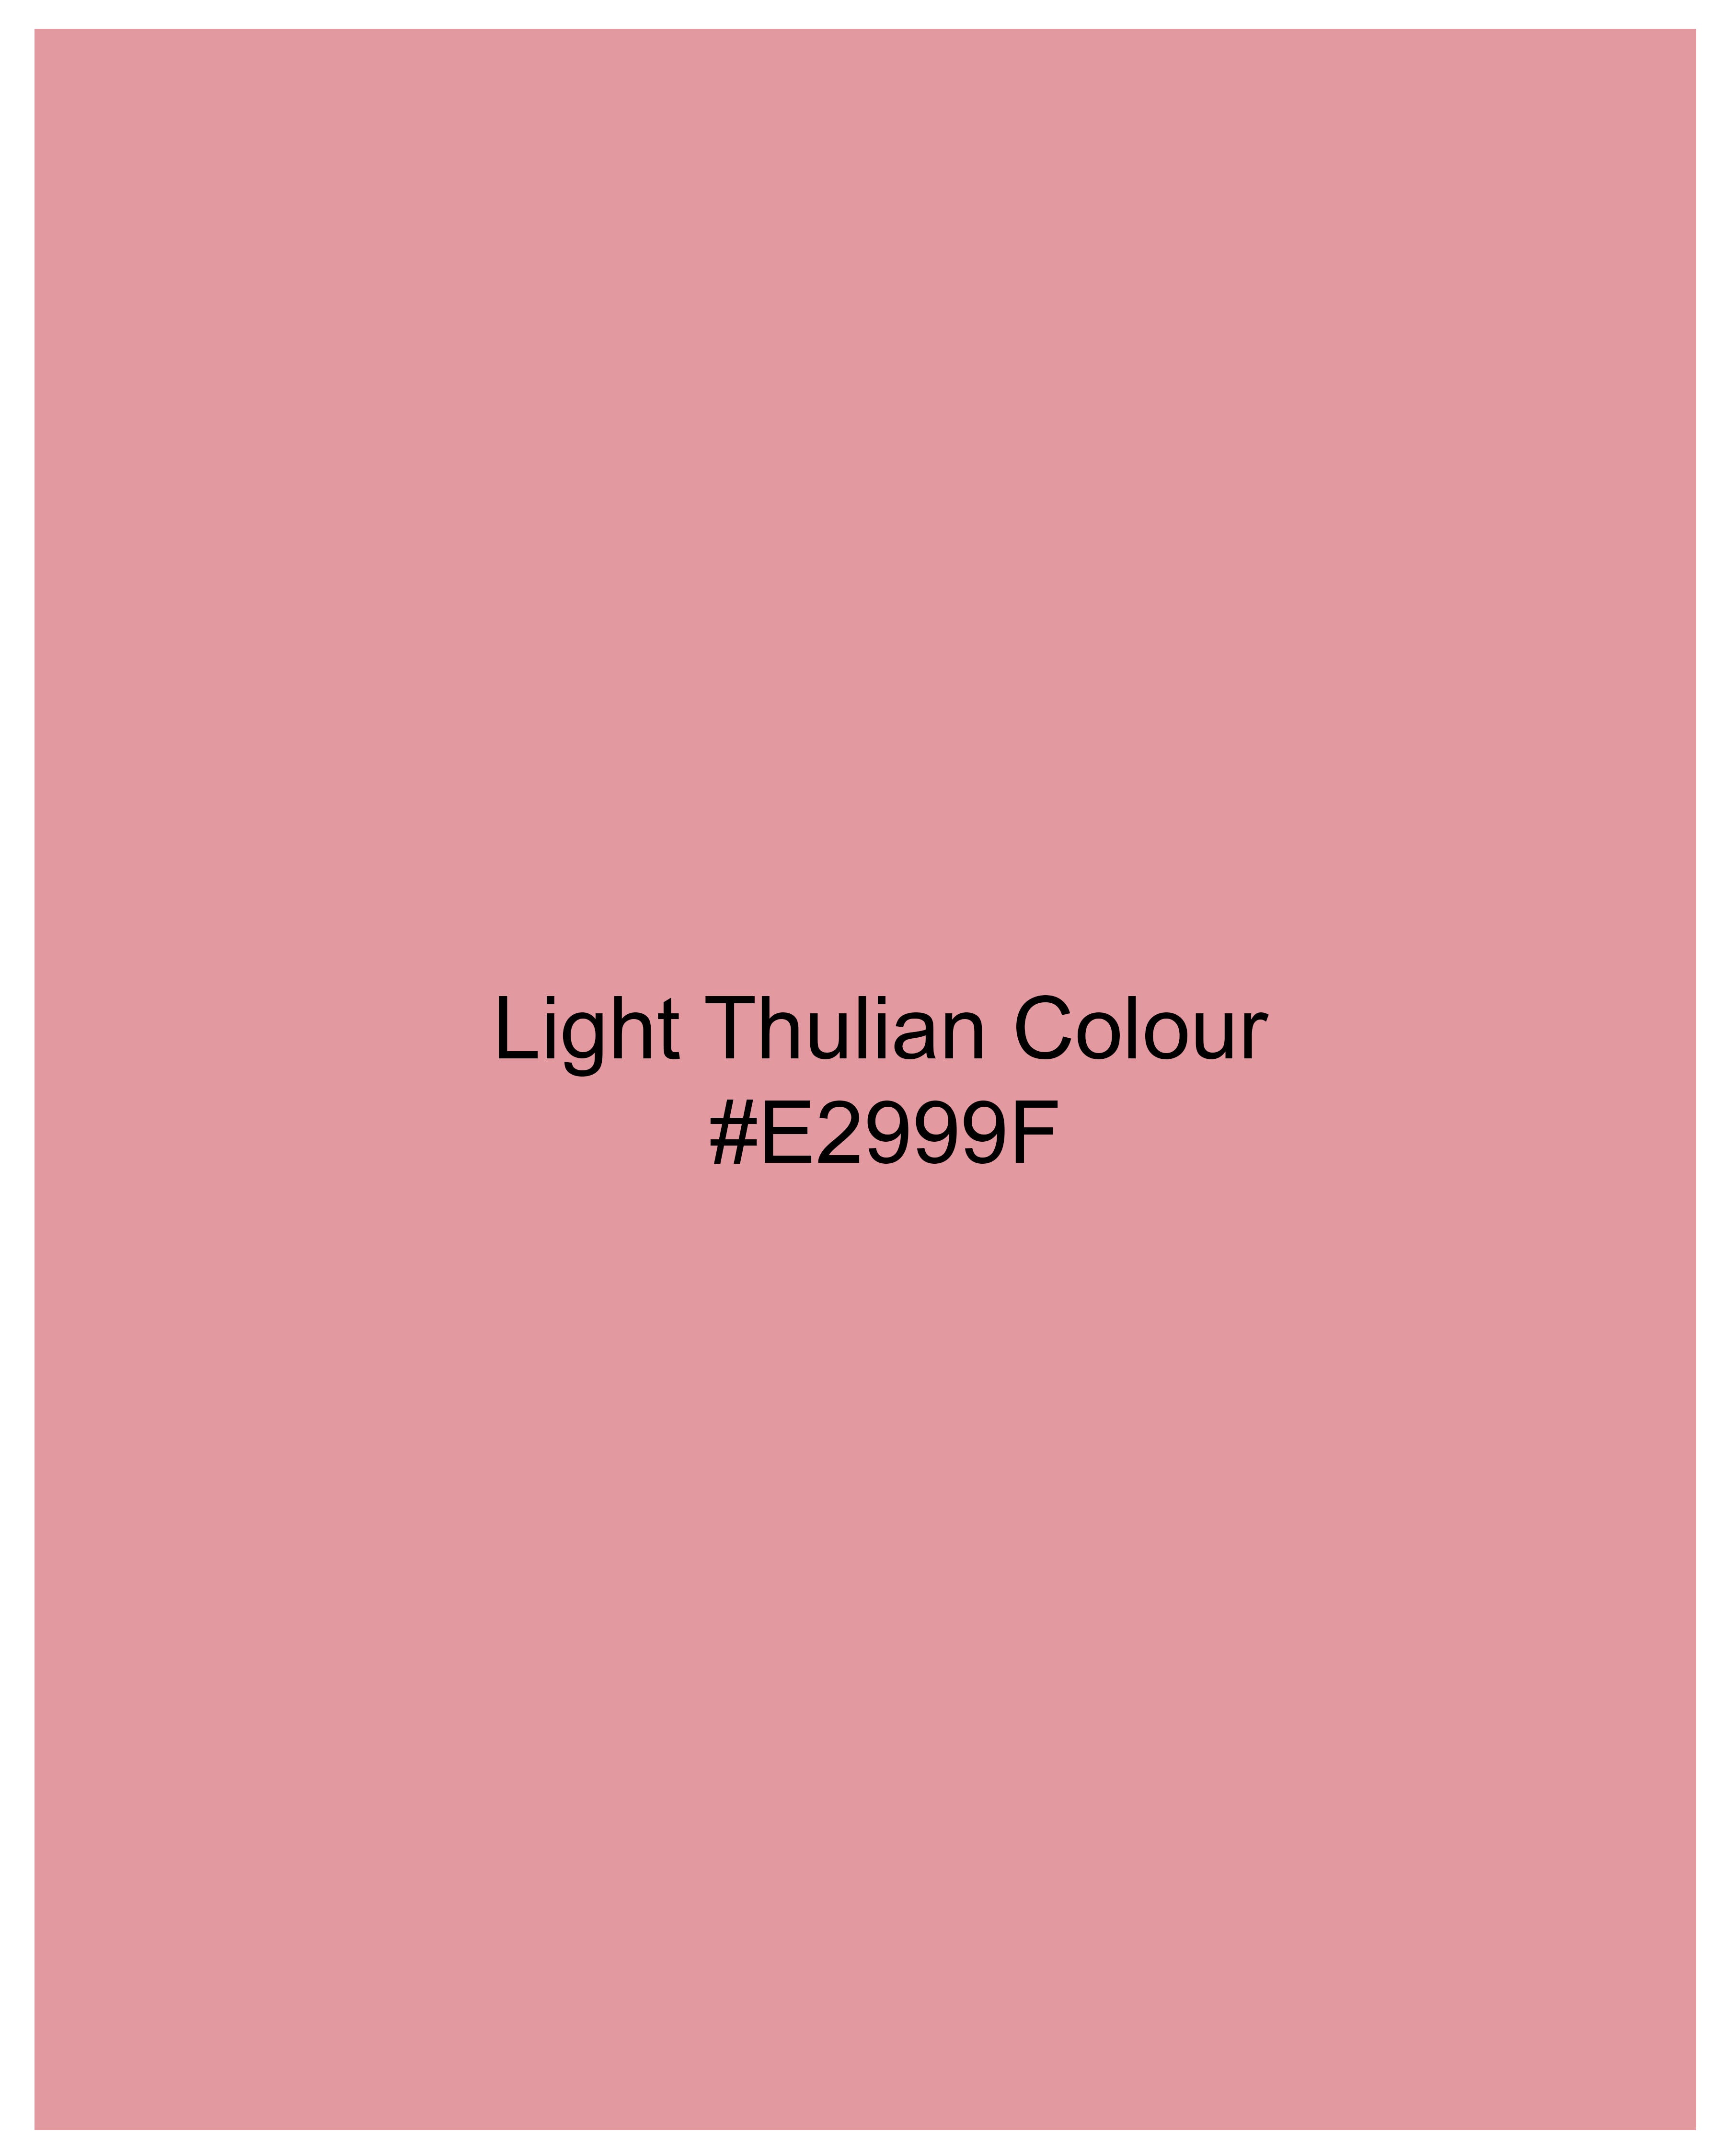 Light Thulian Pink with Multicolour Mountain Like Hand Painted Organic Cotton T-shirt T-shirt TS007-W03-S, TS007-W03-M, TS007-W03-L, TS007-W03-XL, TS007-W03-XXL